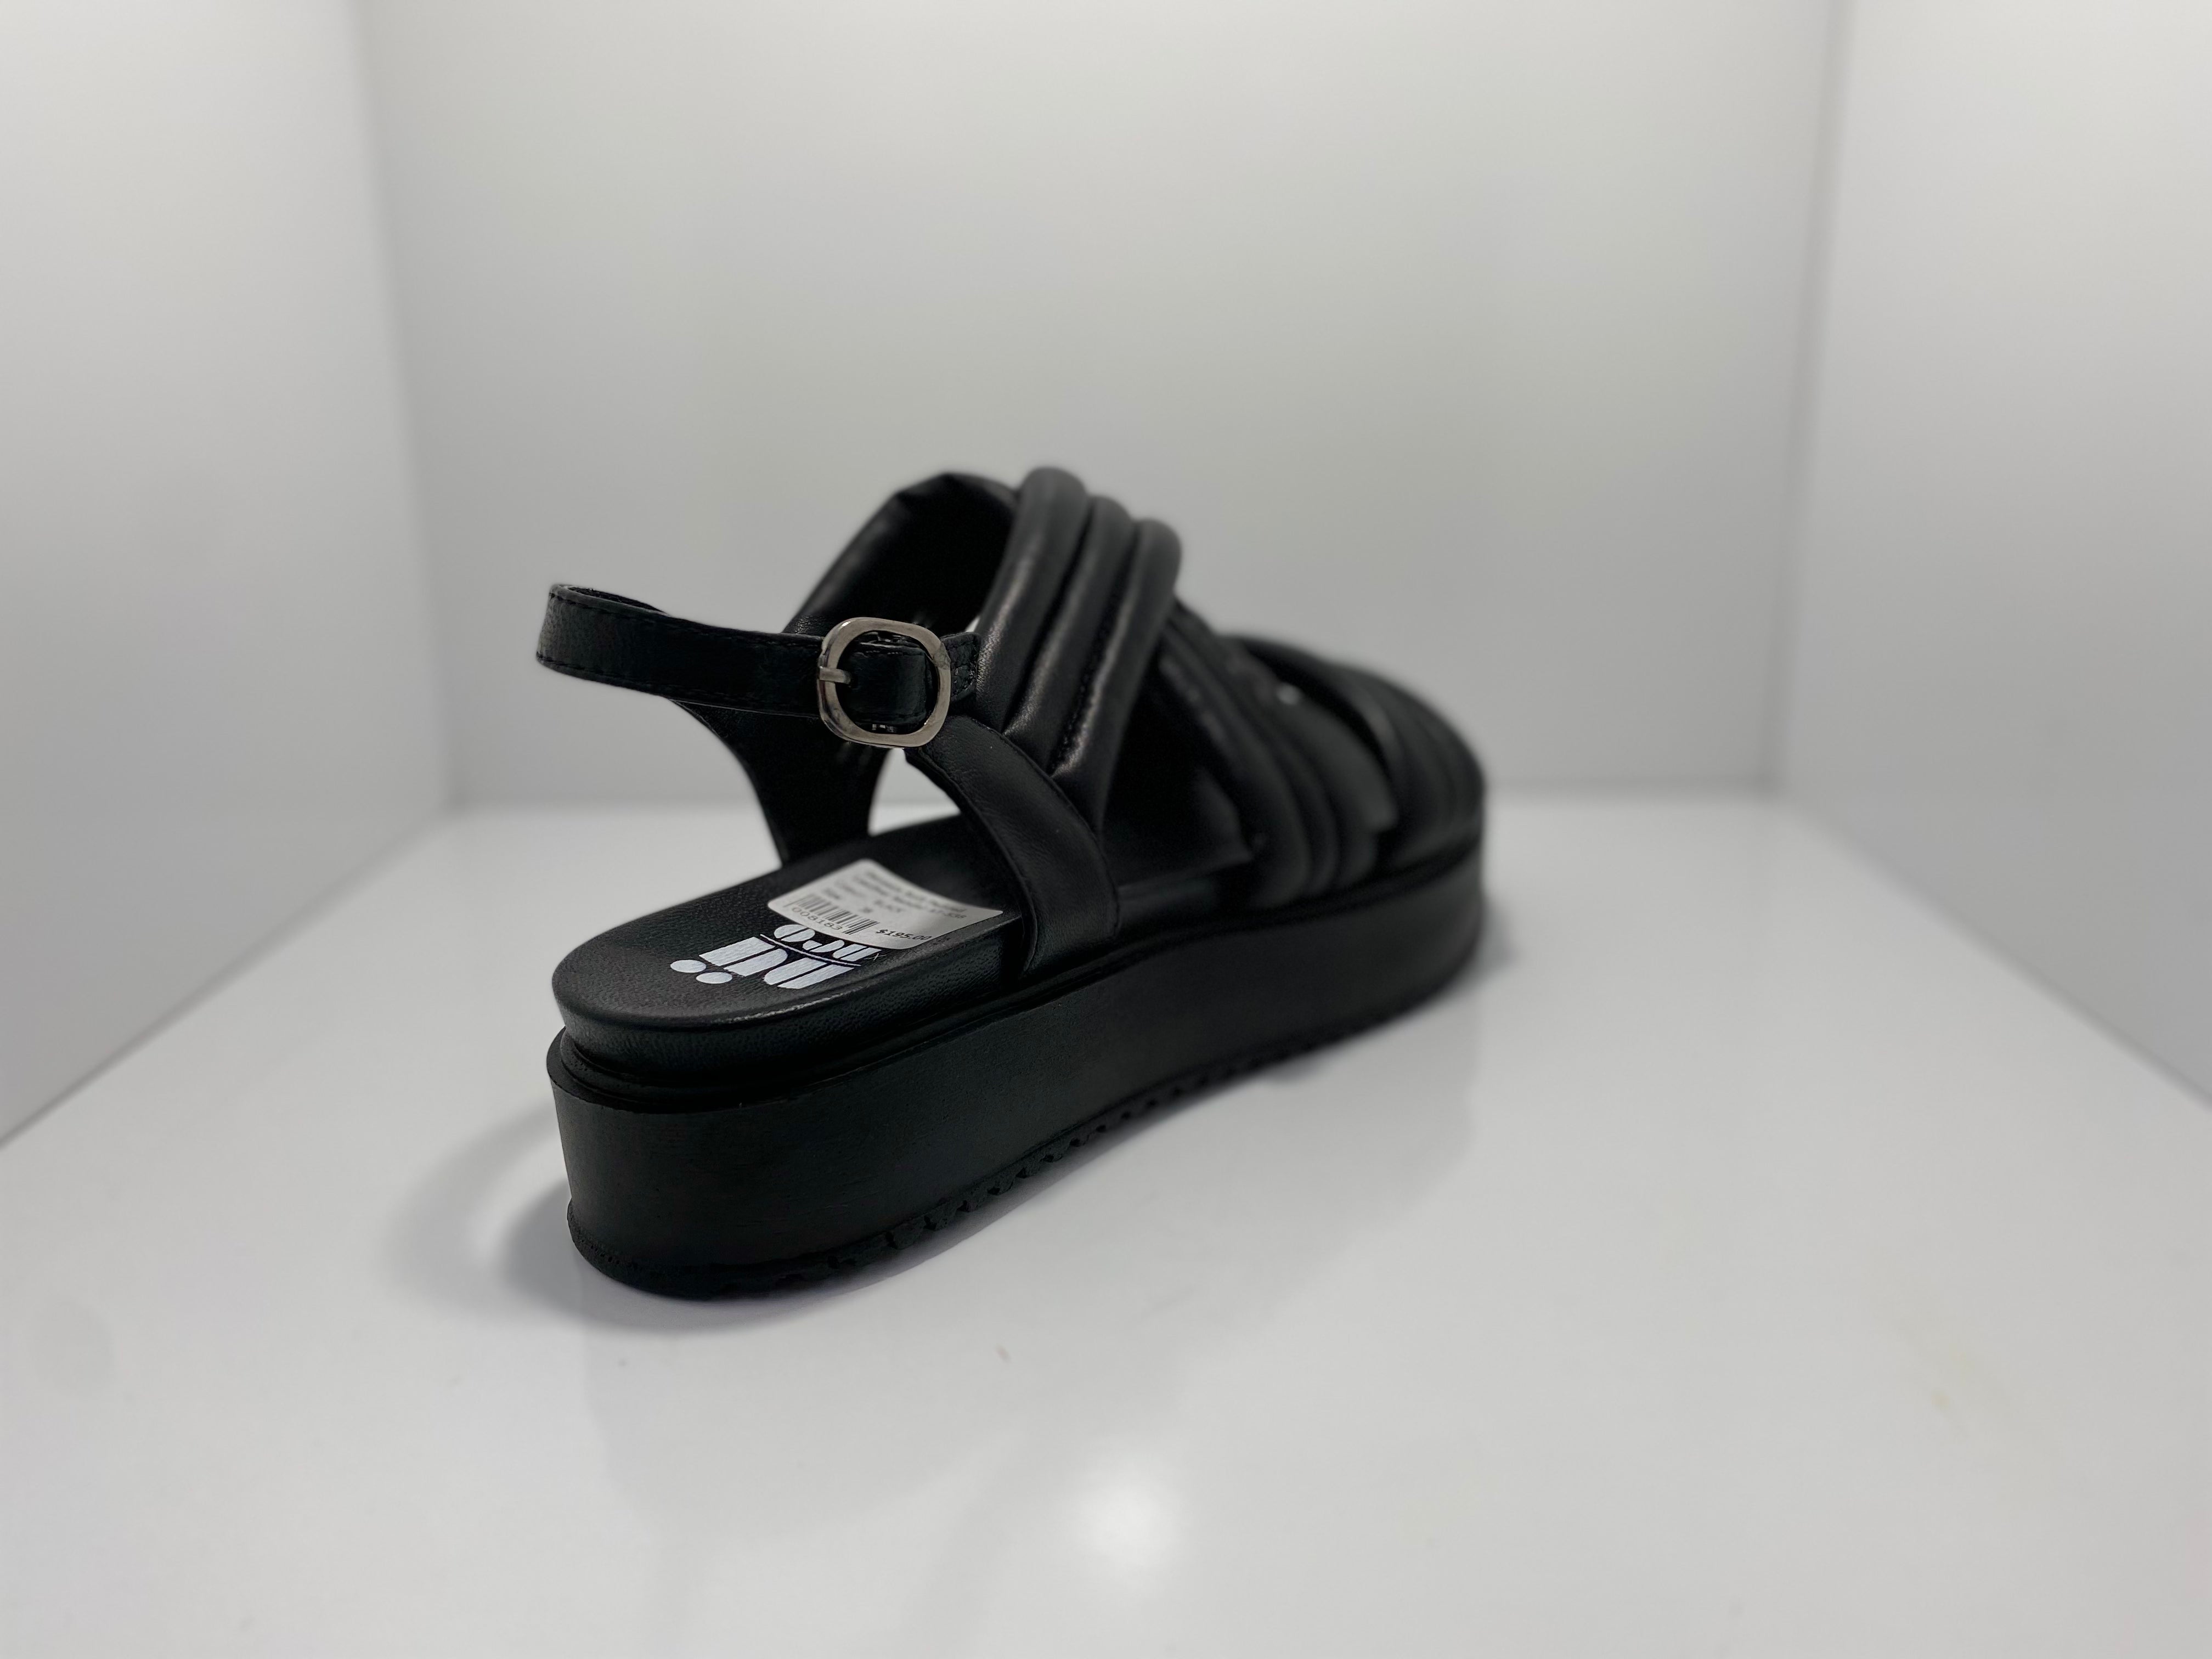 Genesis Soft Padded Leather Sandal AT-538